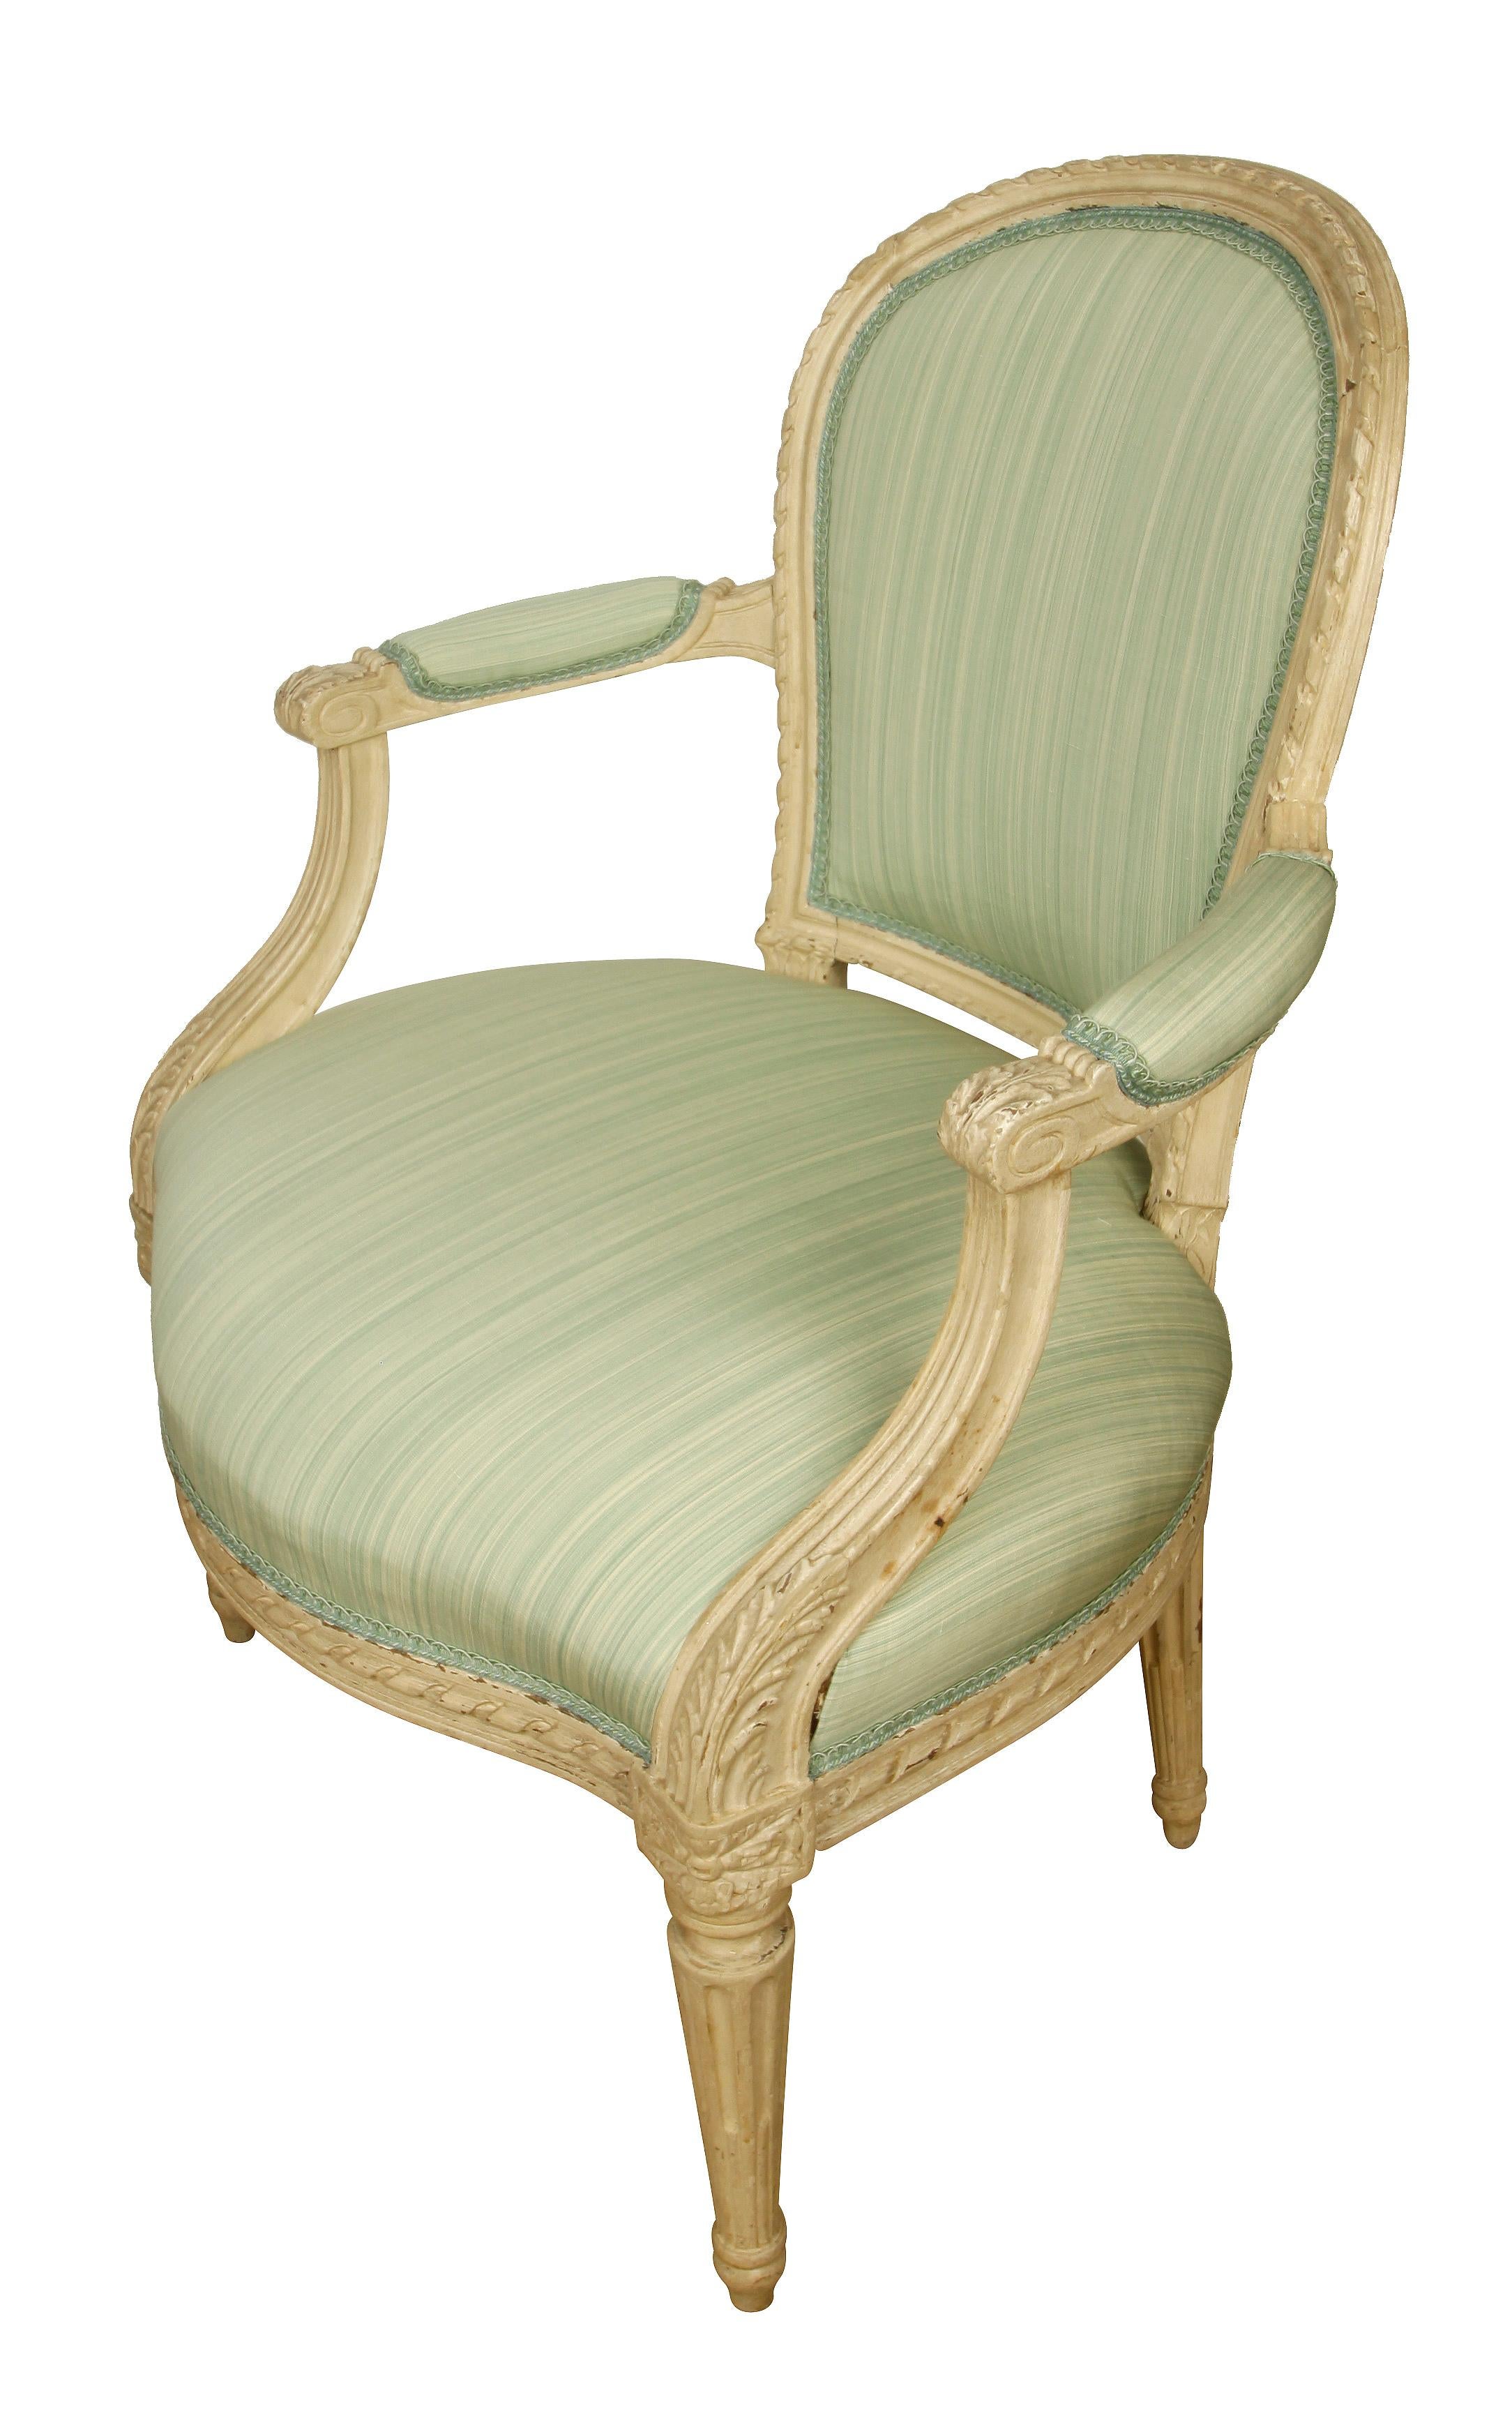 A pair of Louis XVI style armchairs circa 1930 newly upholstered in an aqua silk stripe fabric. Seat backs upholstered in a coordinating aqua silk check.